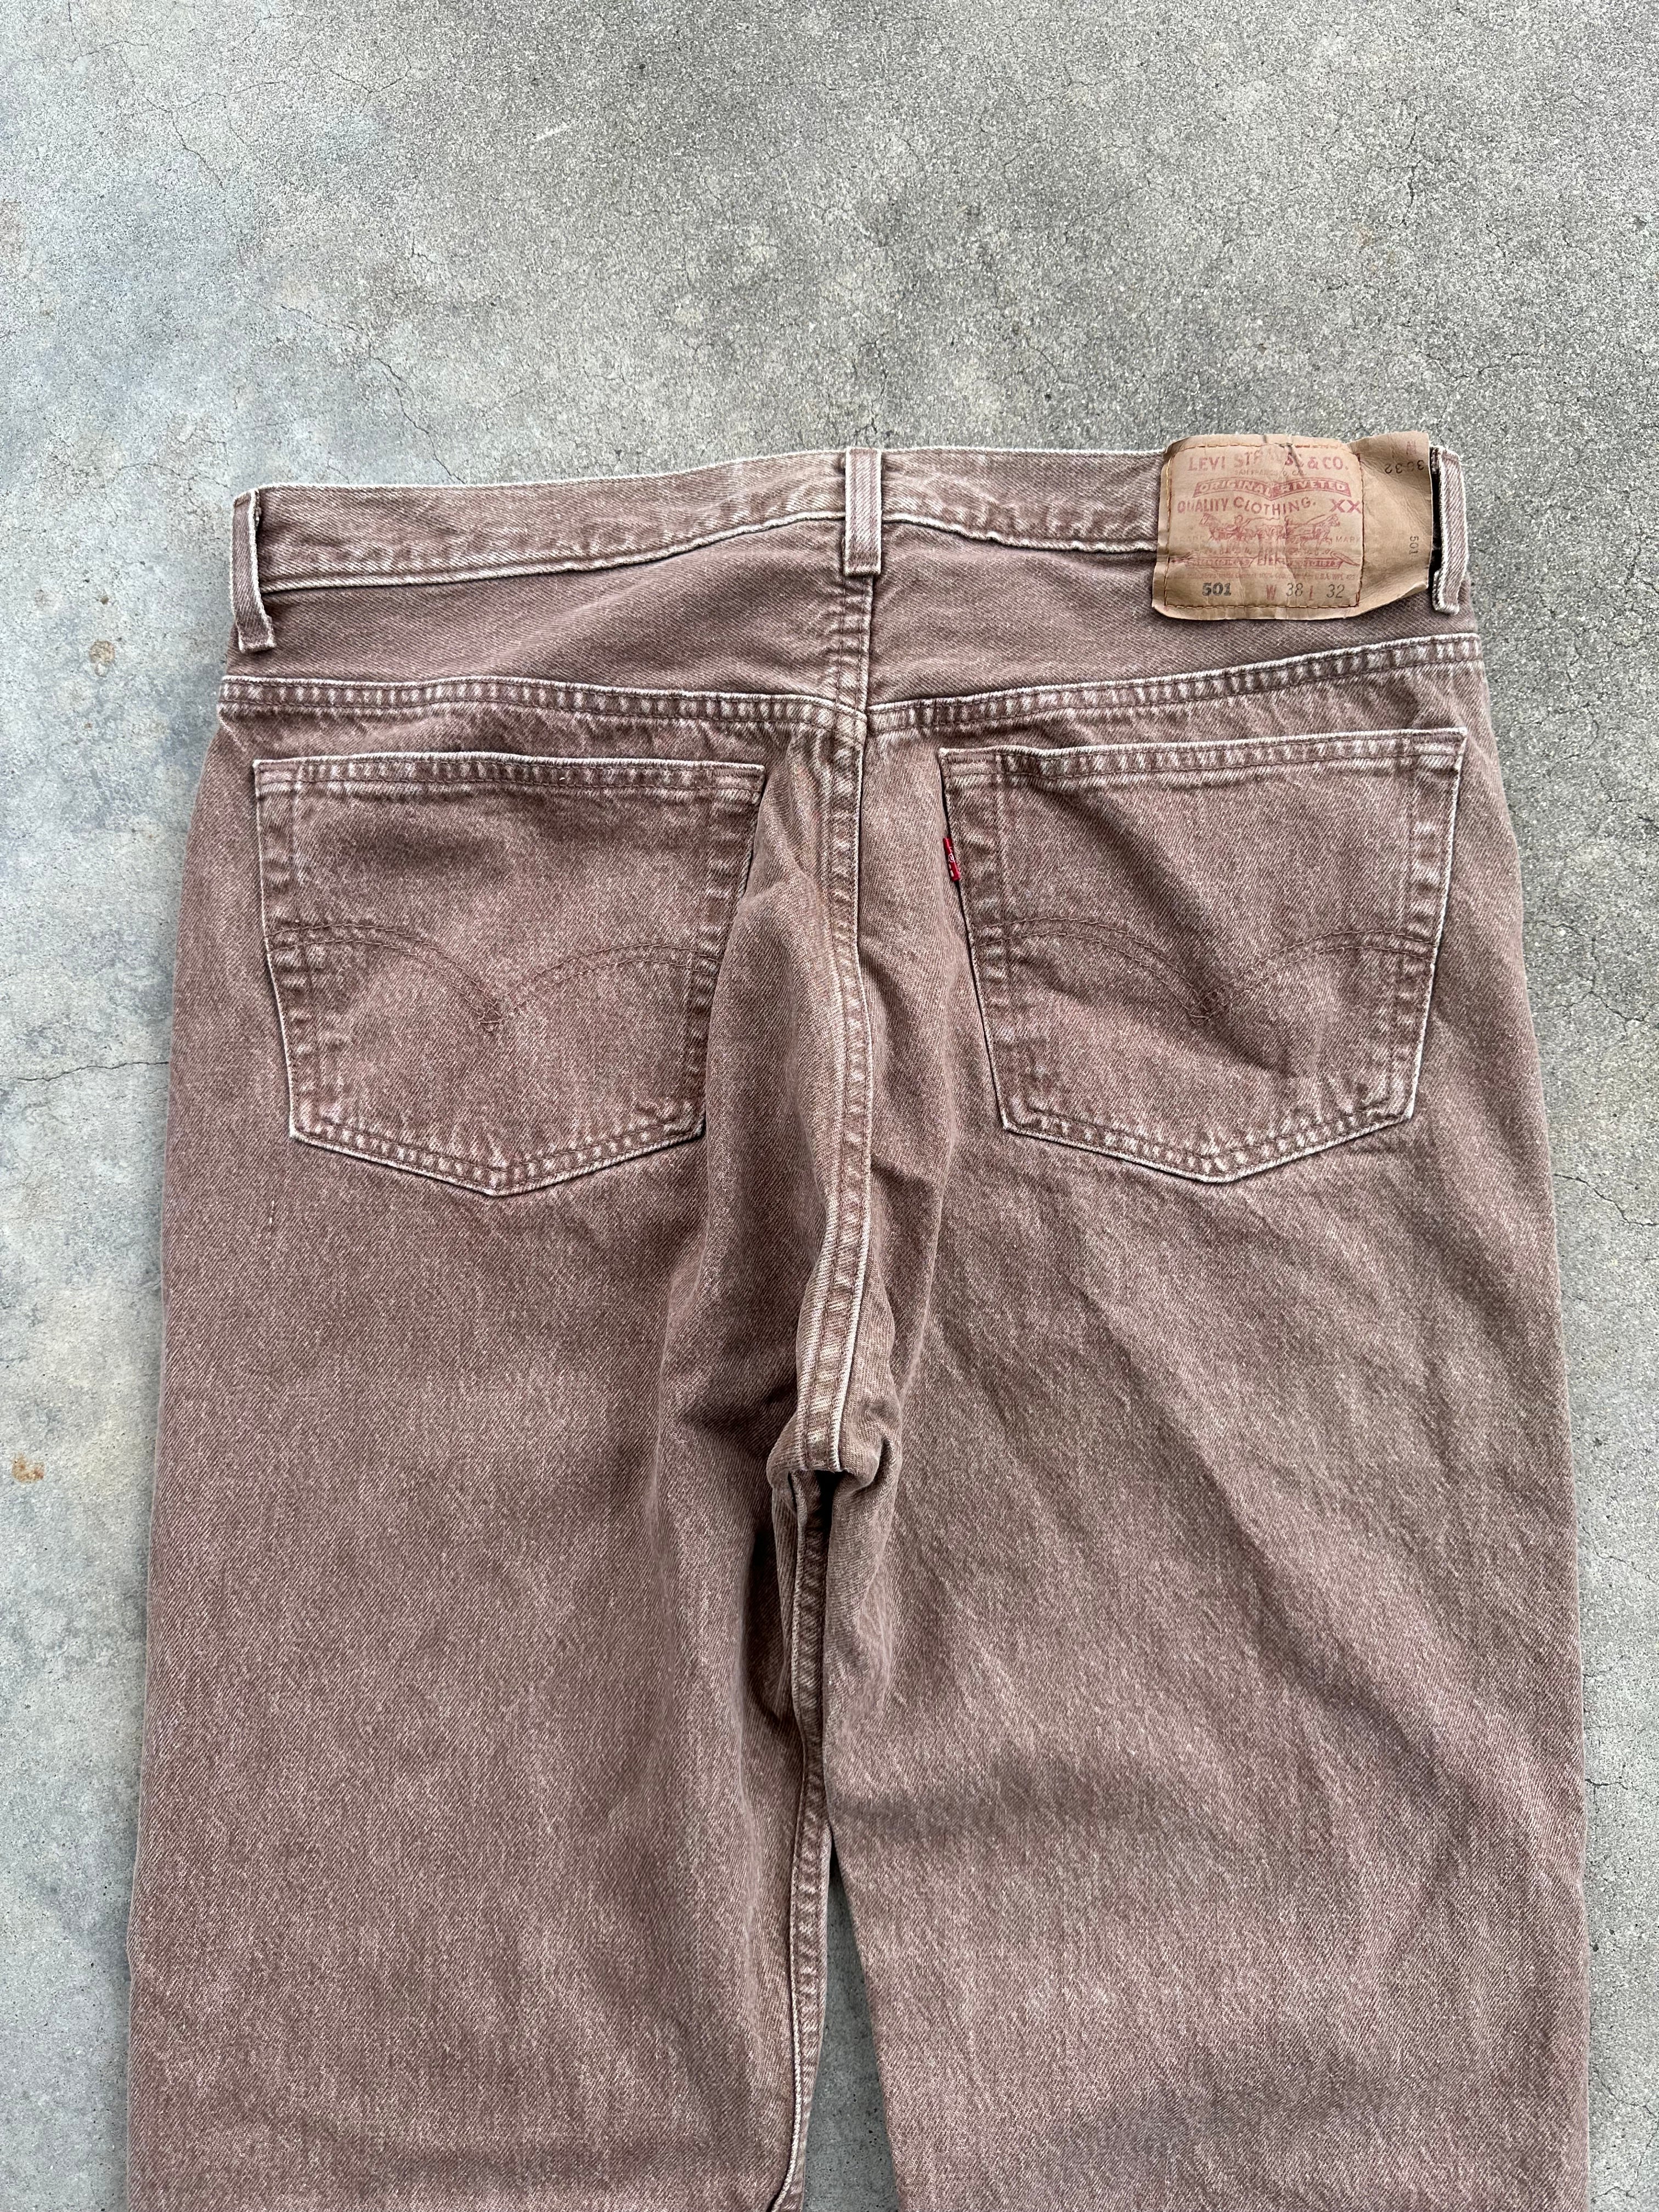 1990s Levi’s 501 Brown Jeans (35"x31.5")